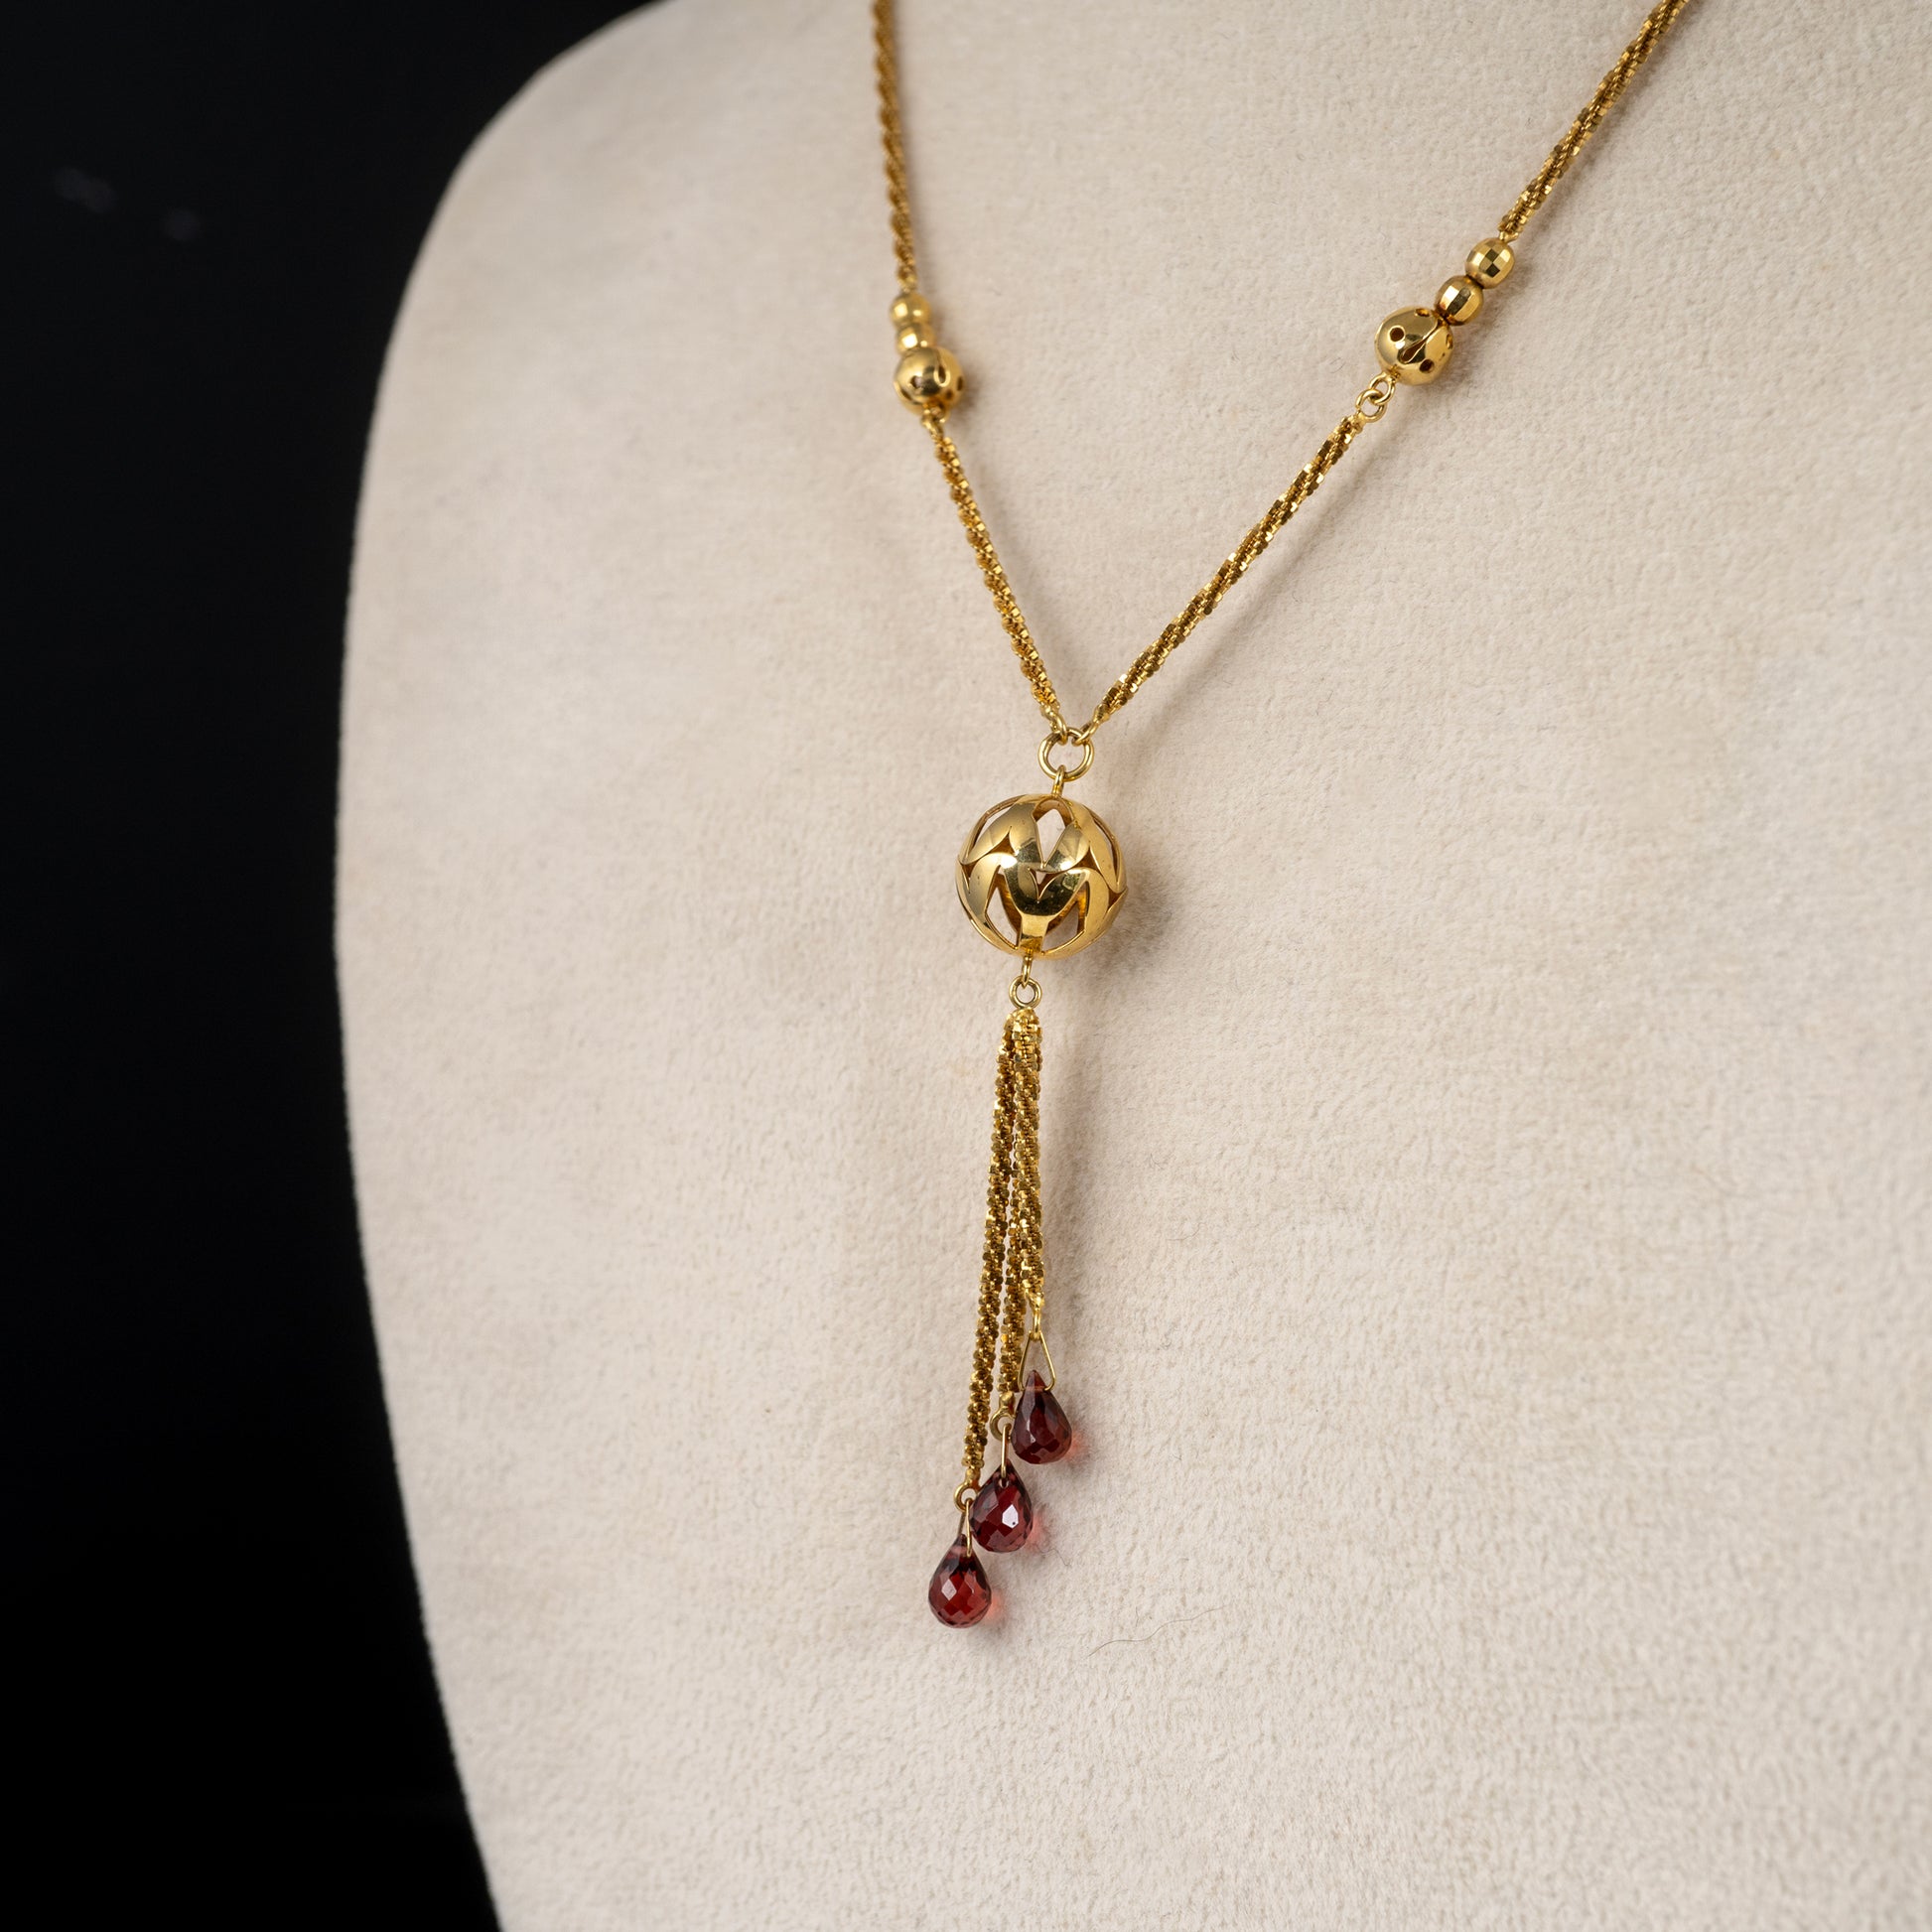 Gold Tassel Pendant Necklace with Garnet Accents in 9ct Gold